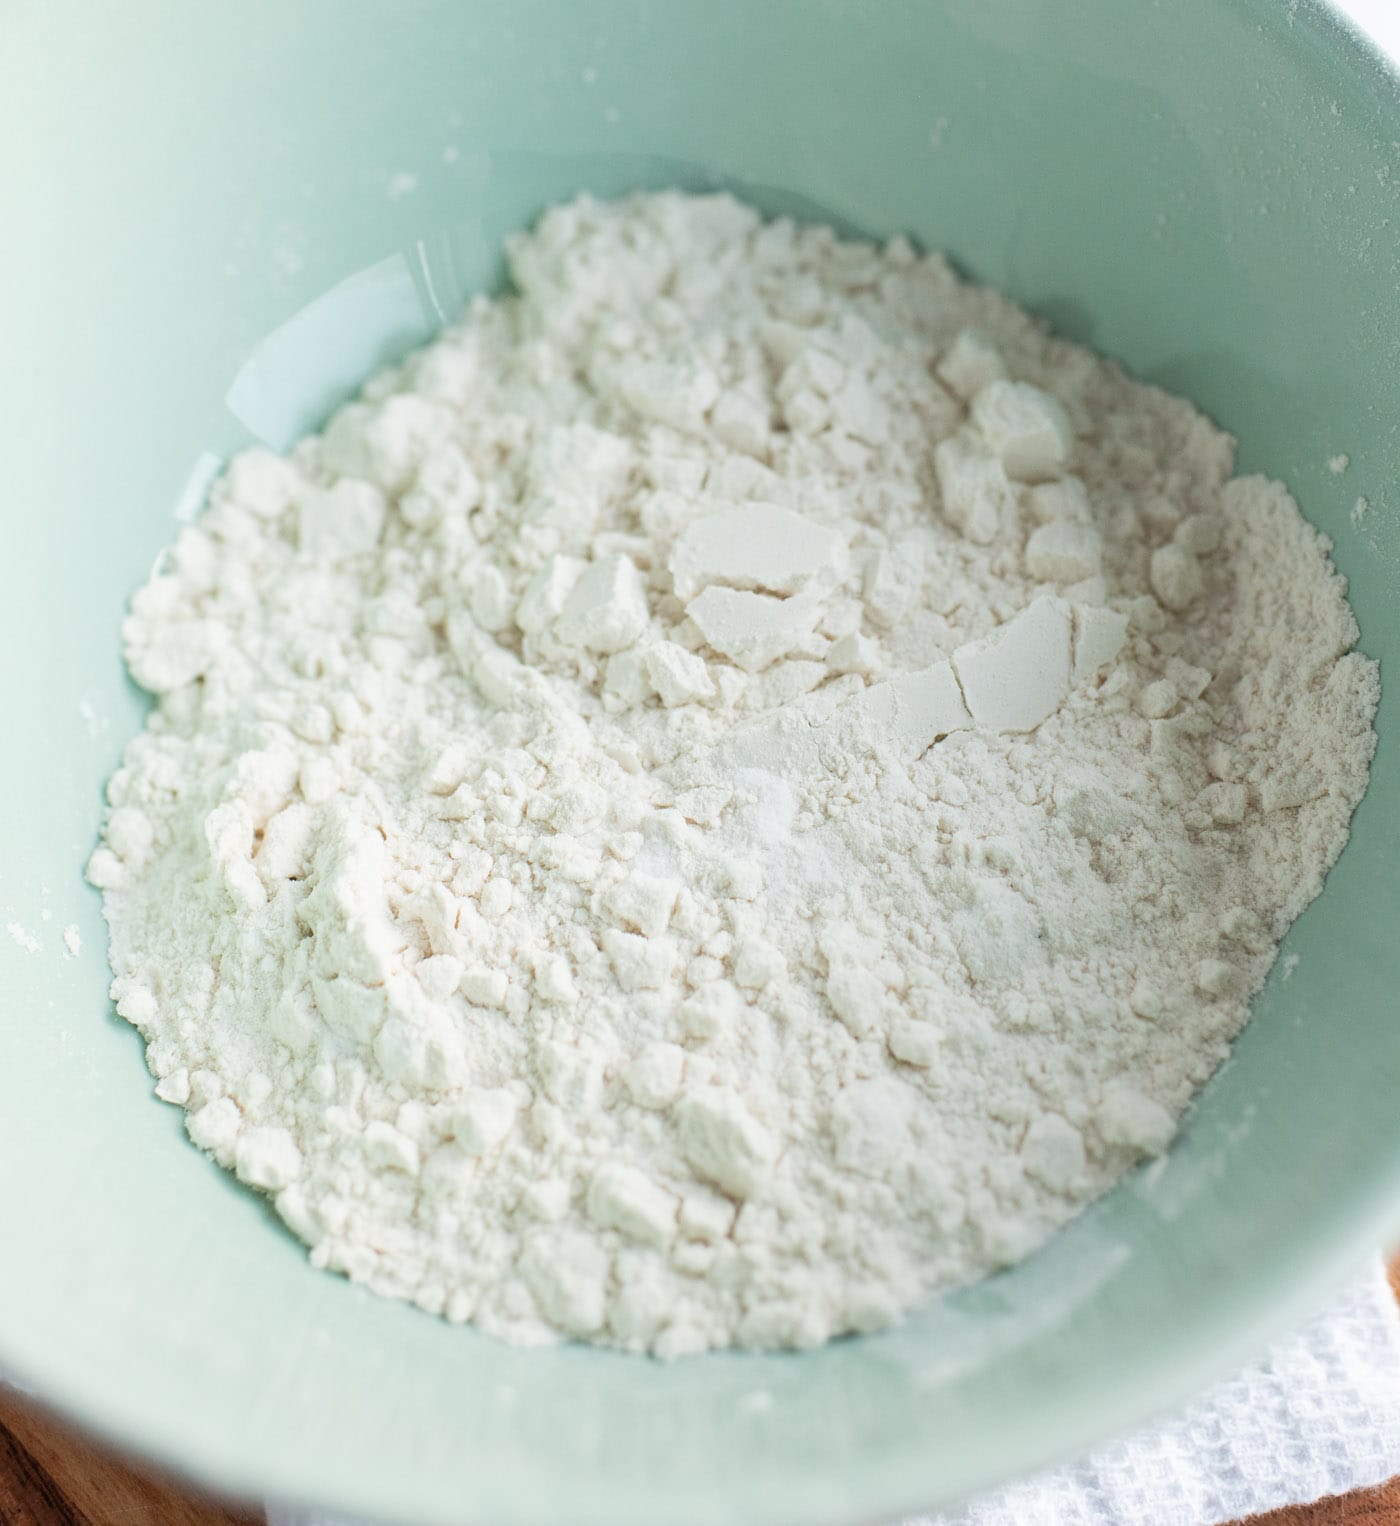 flour, baking soda, and salt in a mixing bowl